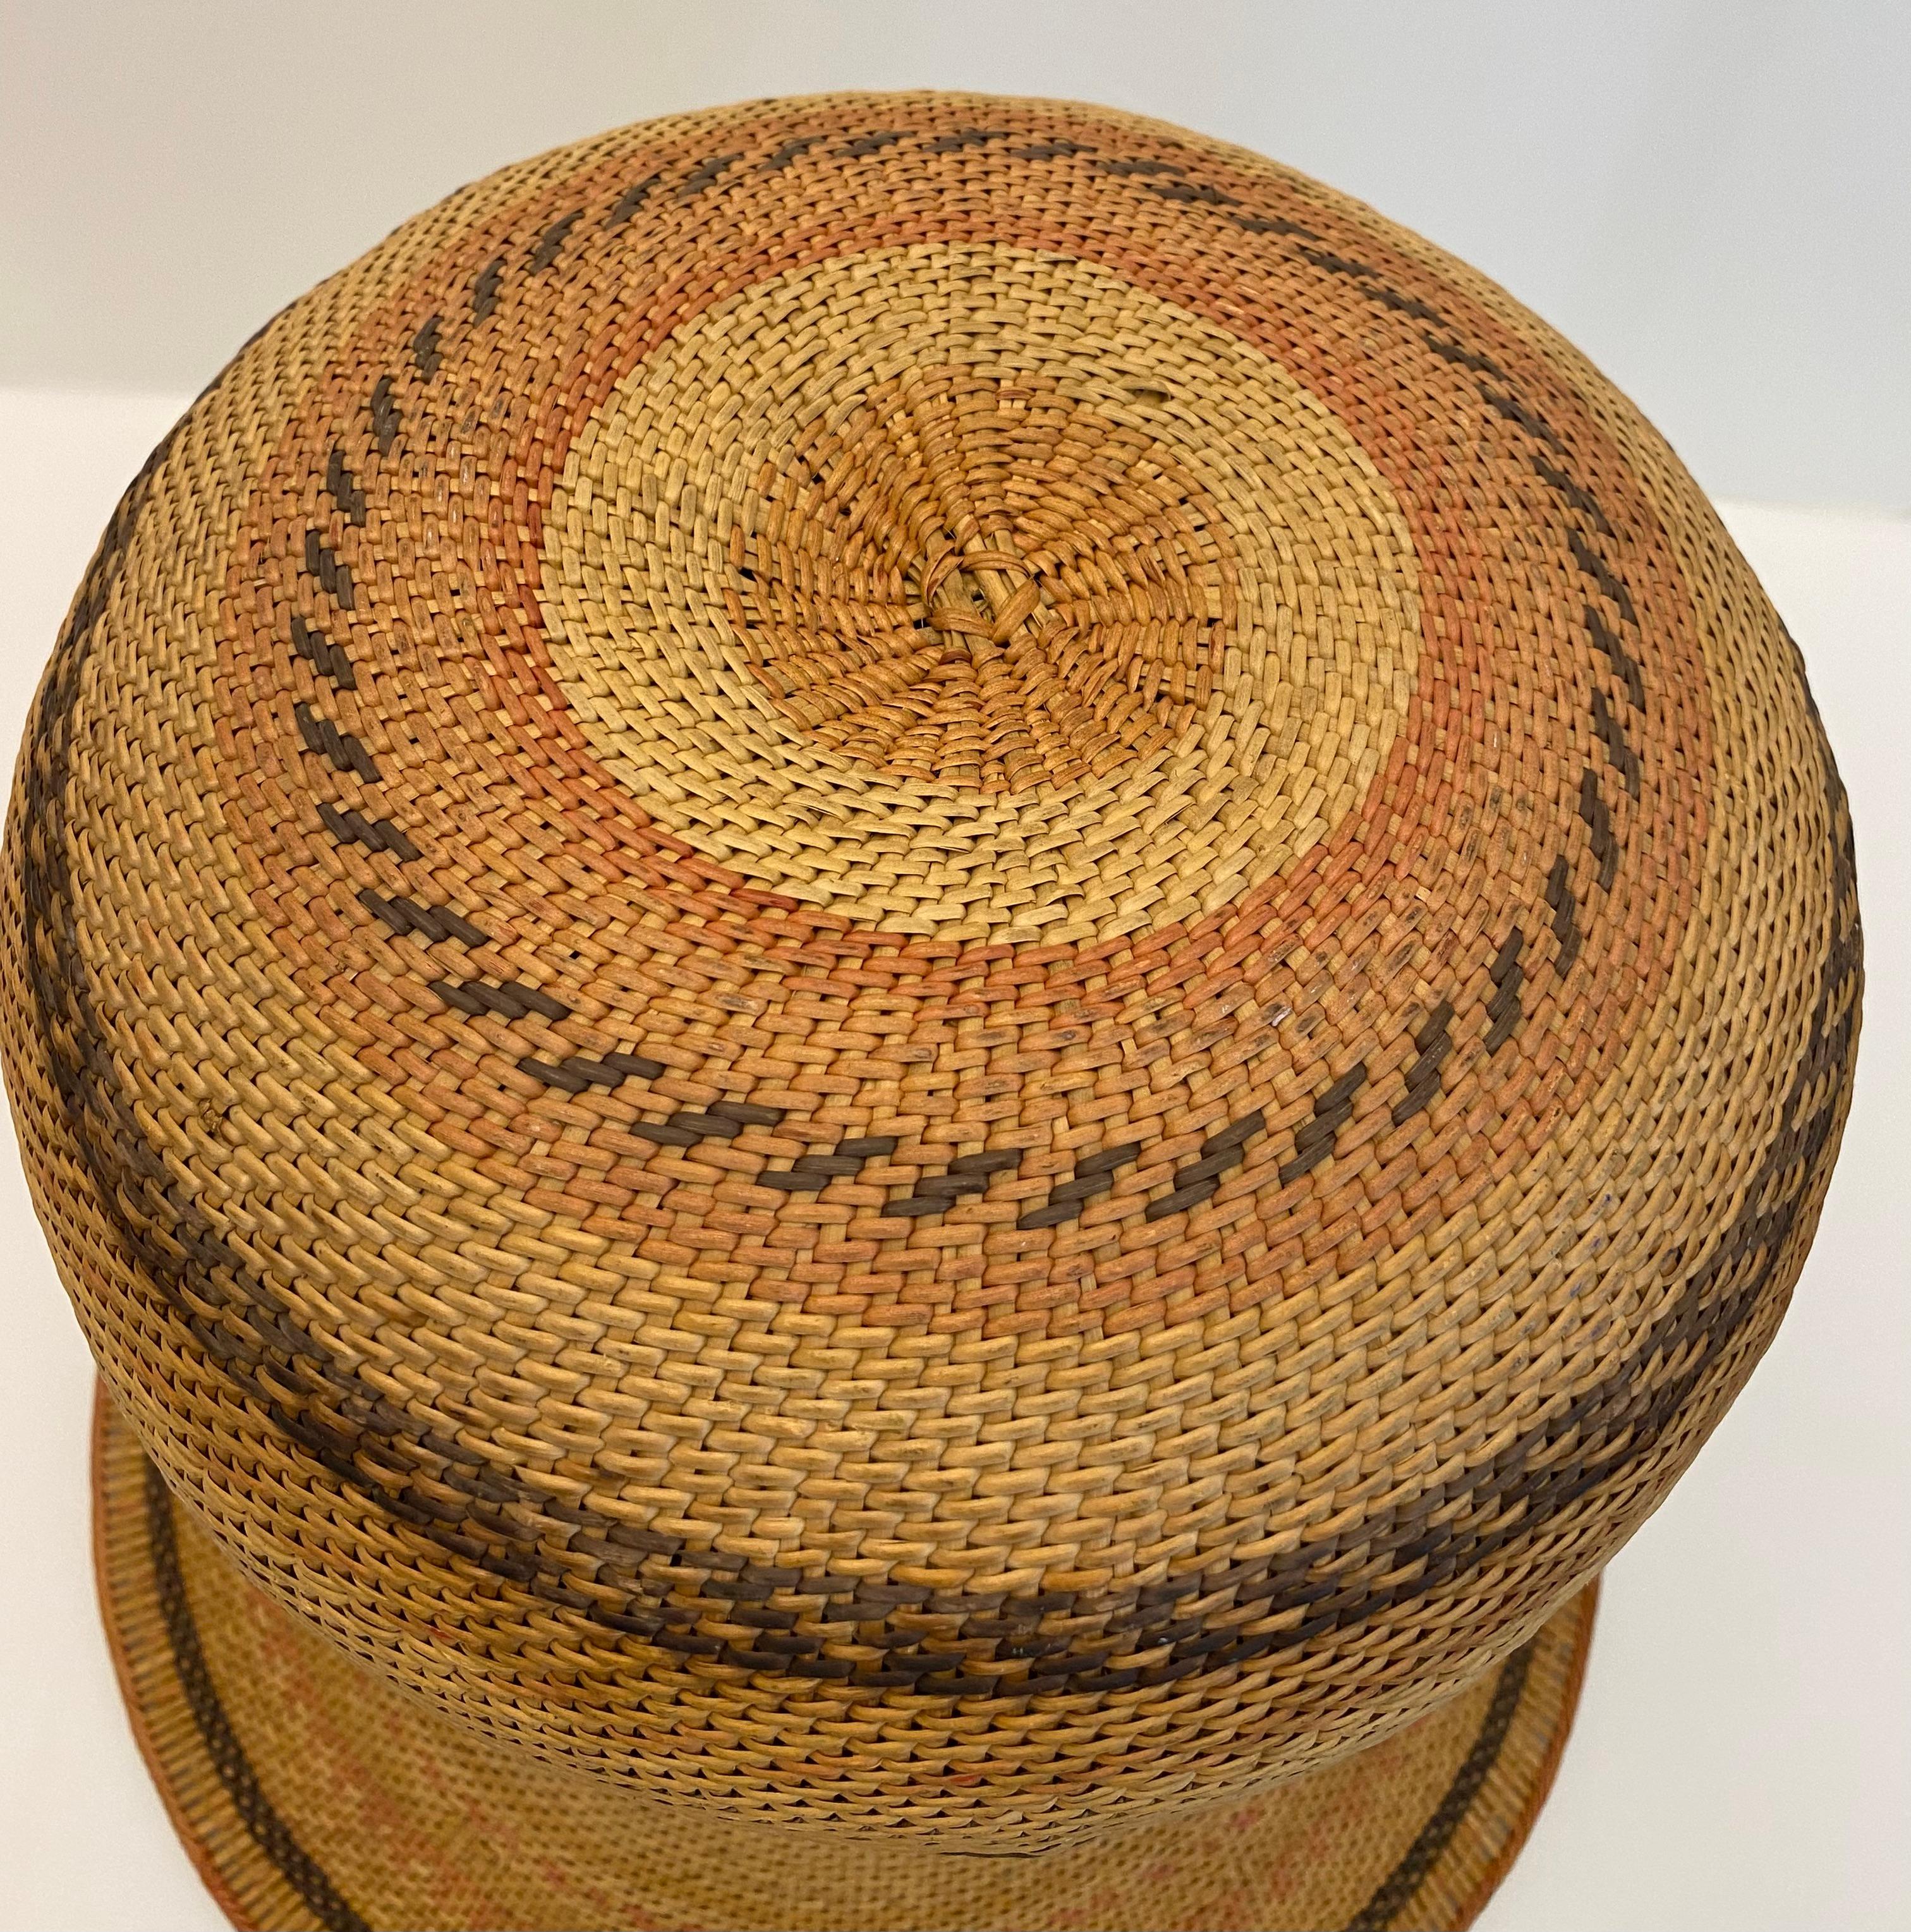 Palmwood Hand Woven Basket by the Tribal People of the Amazon 